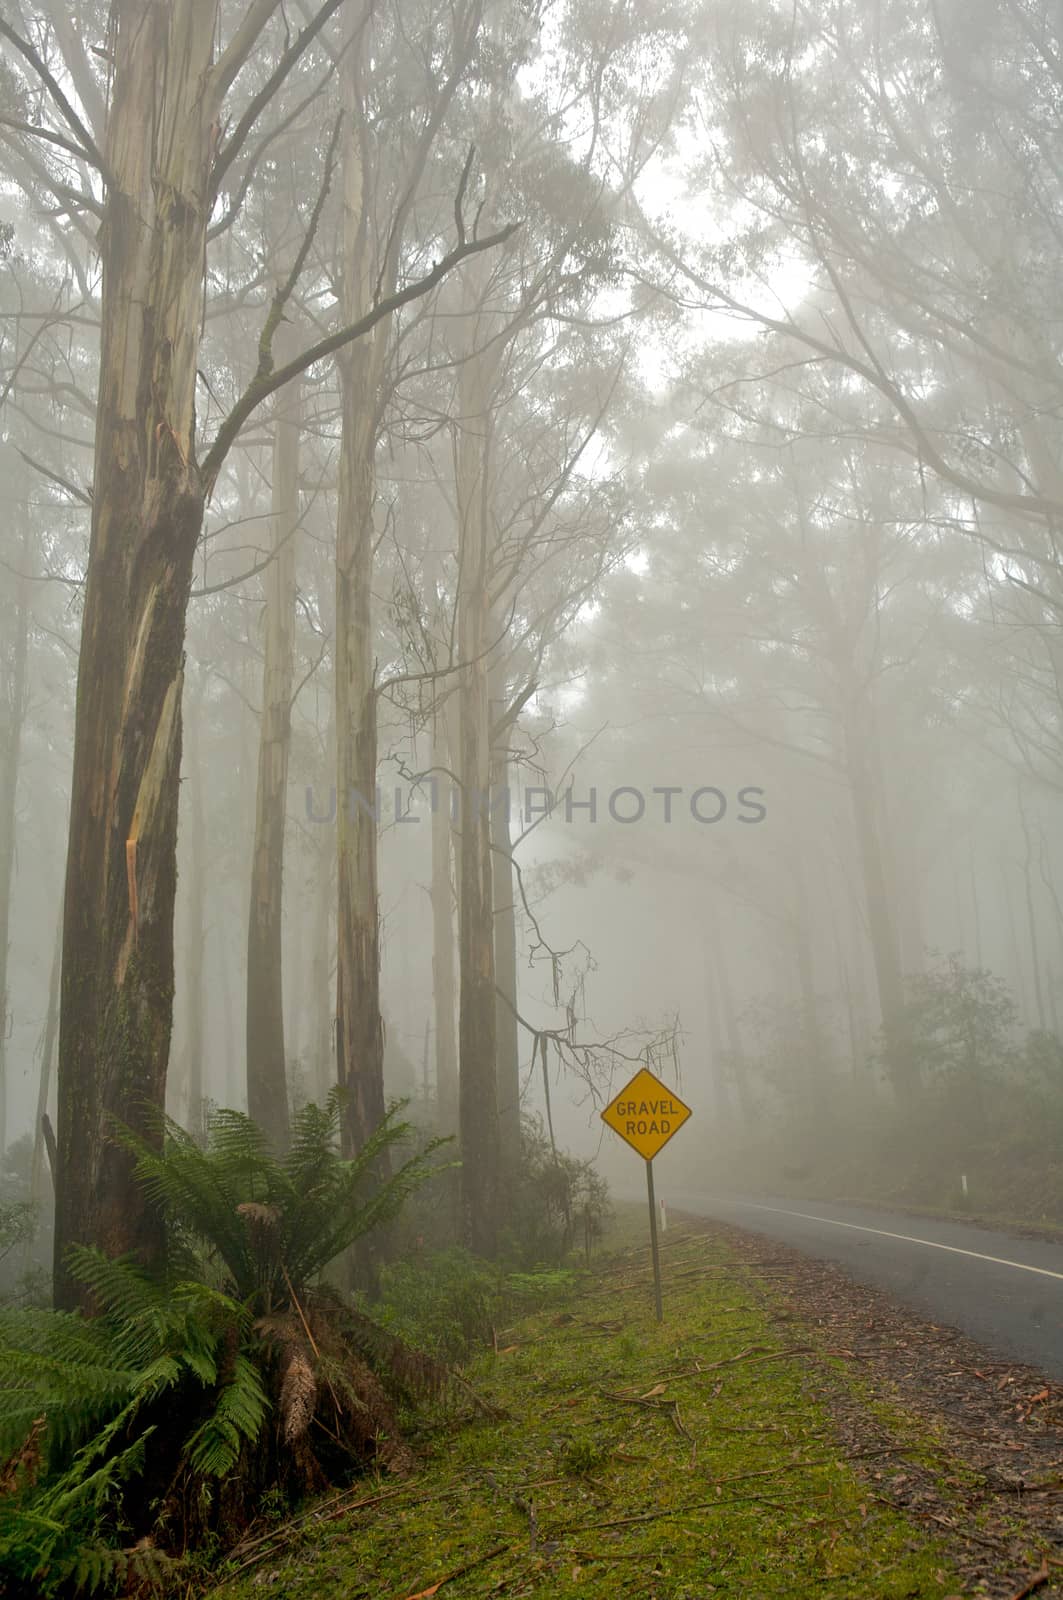 A road leading into the misty forrest, Journey Road 